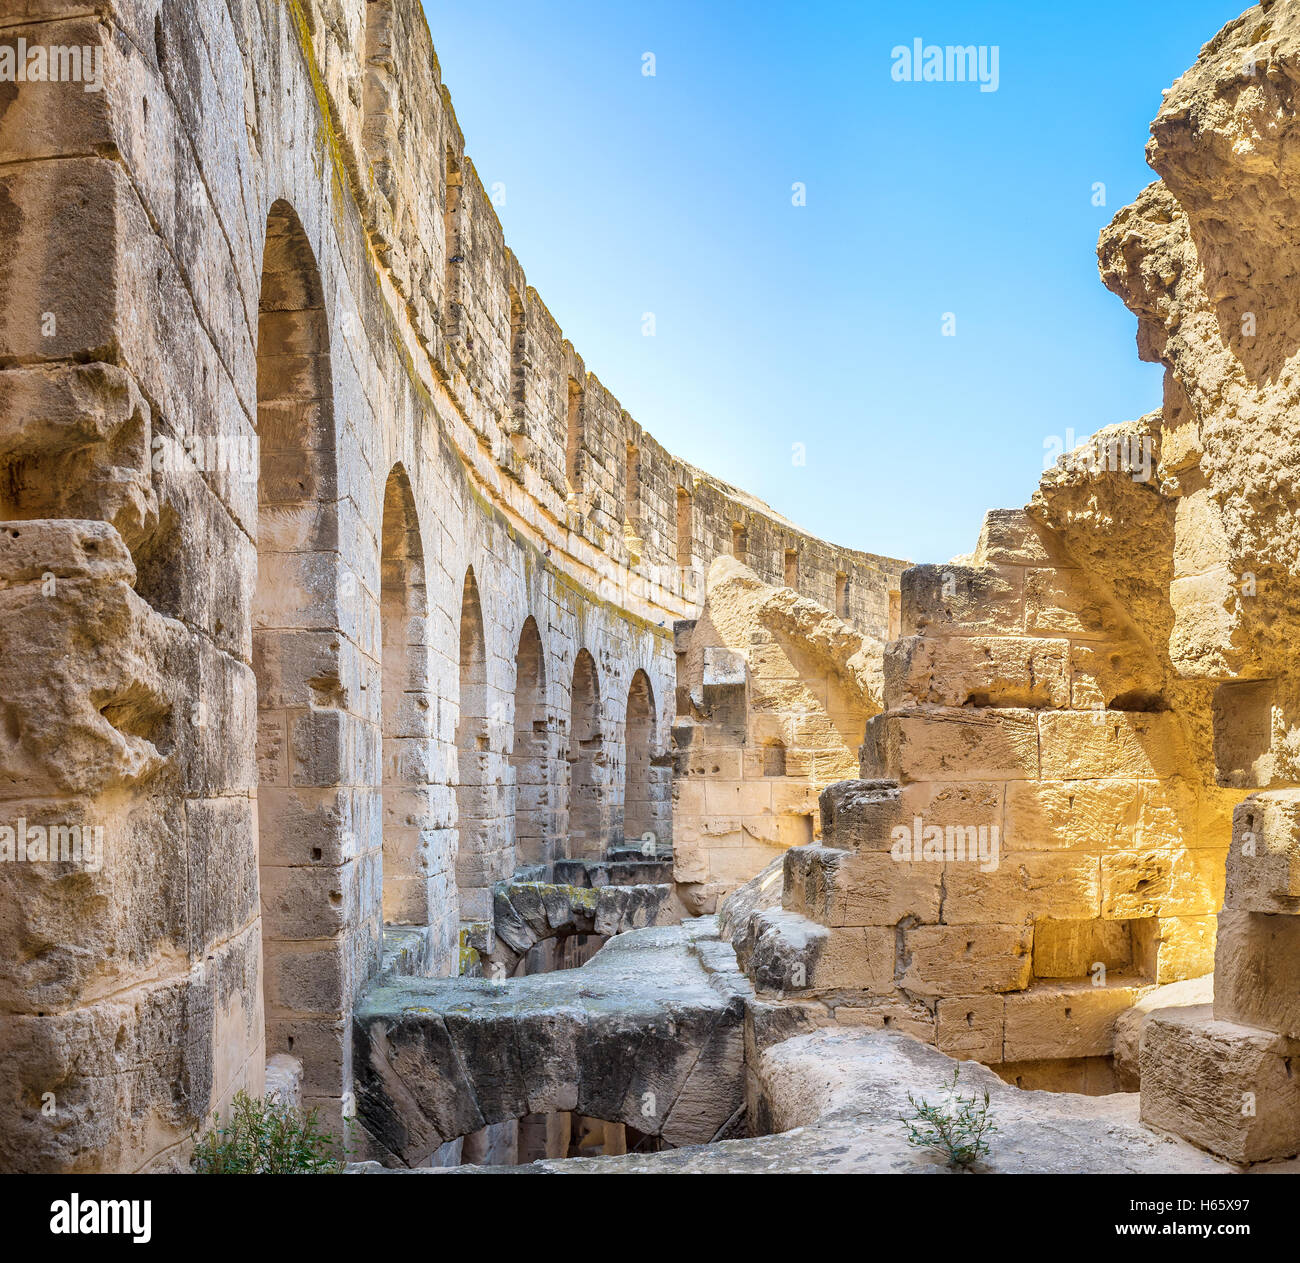 Some of constructions in the old Roman amphitheatre were ruined, but the main wall is in good condition, El Jem Tunisia Stock Photo